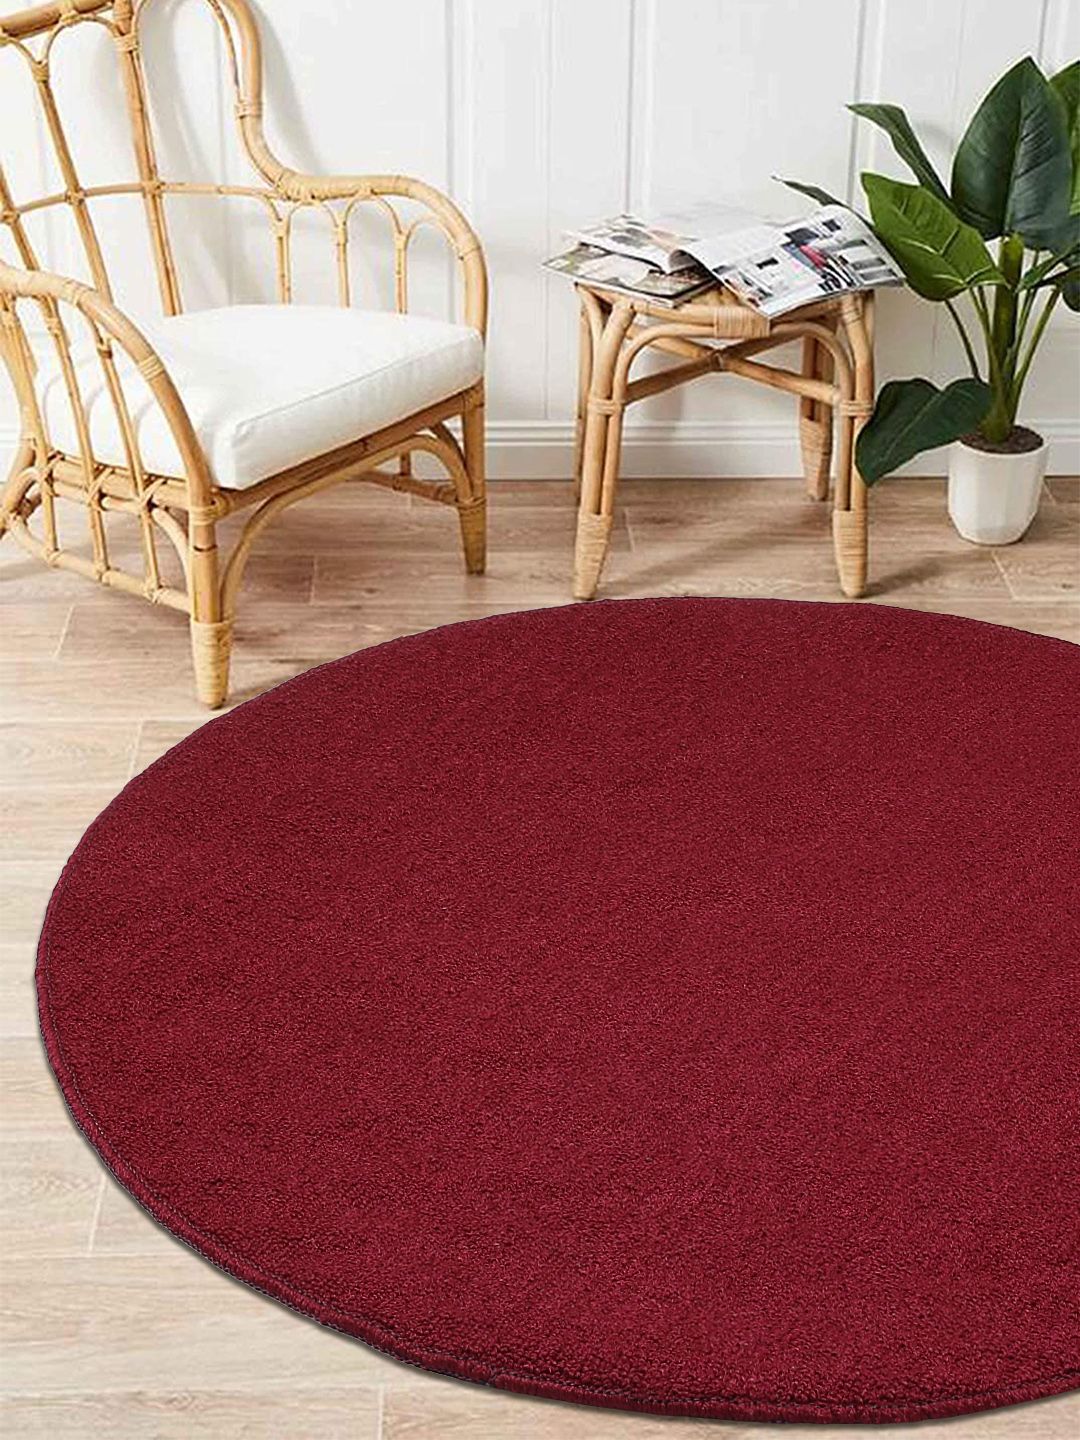 Saral Home Maroon Solid PP-Yarn Round Anti-Skid Multi-Use Floor Mat Price in India